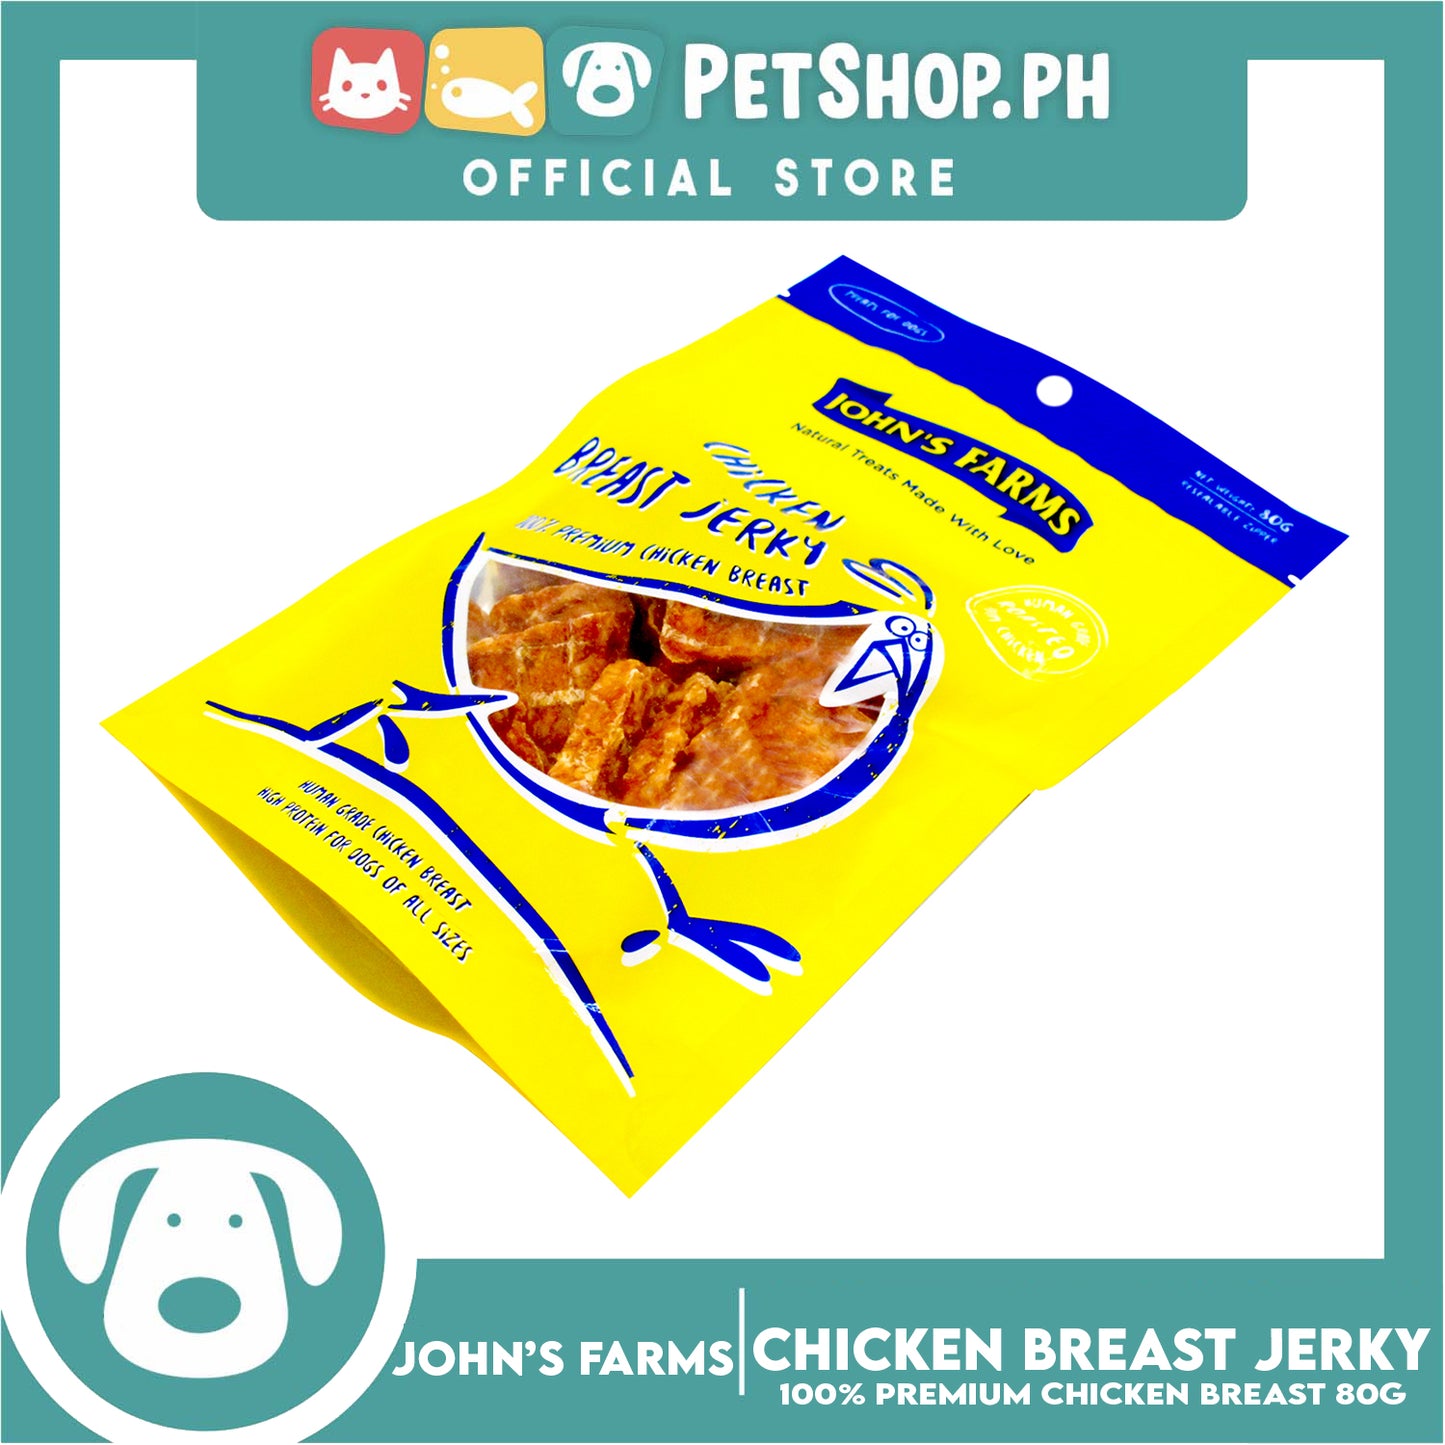 John's Farms Dog Food, High Protein For Dogs Of All Sizes, Resealable Zipper 80g (Chicken Breast Jerky) Dog Treats